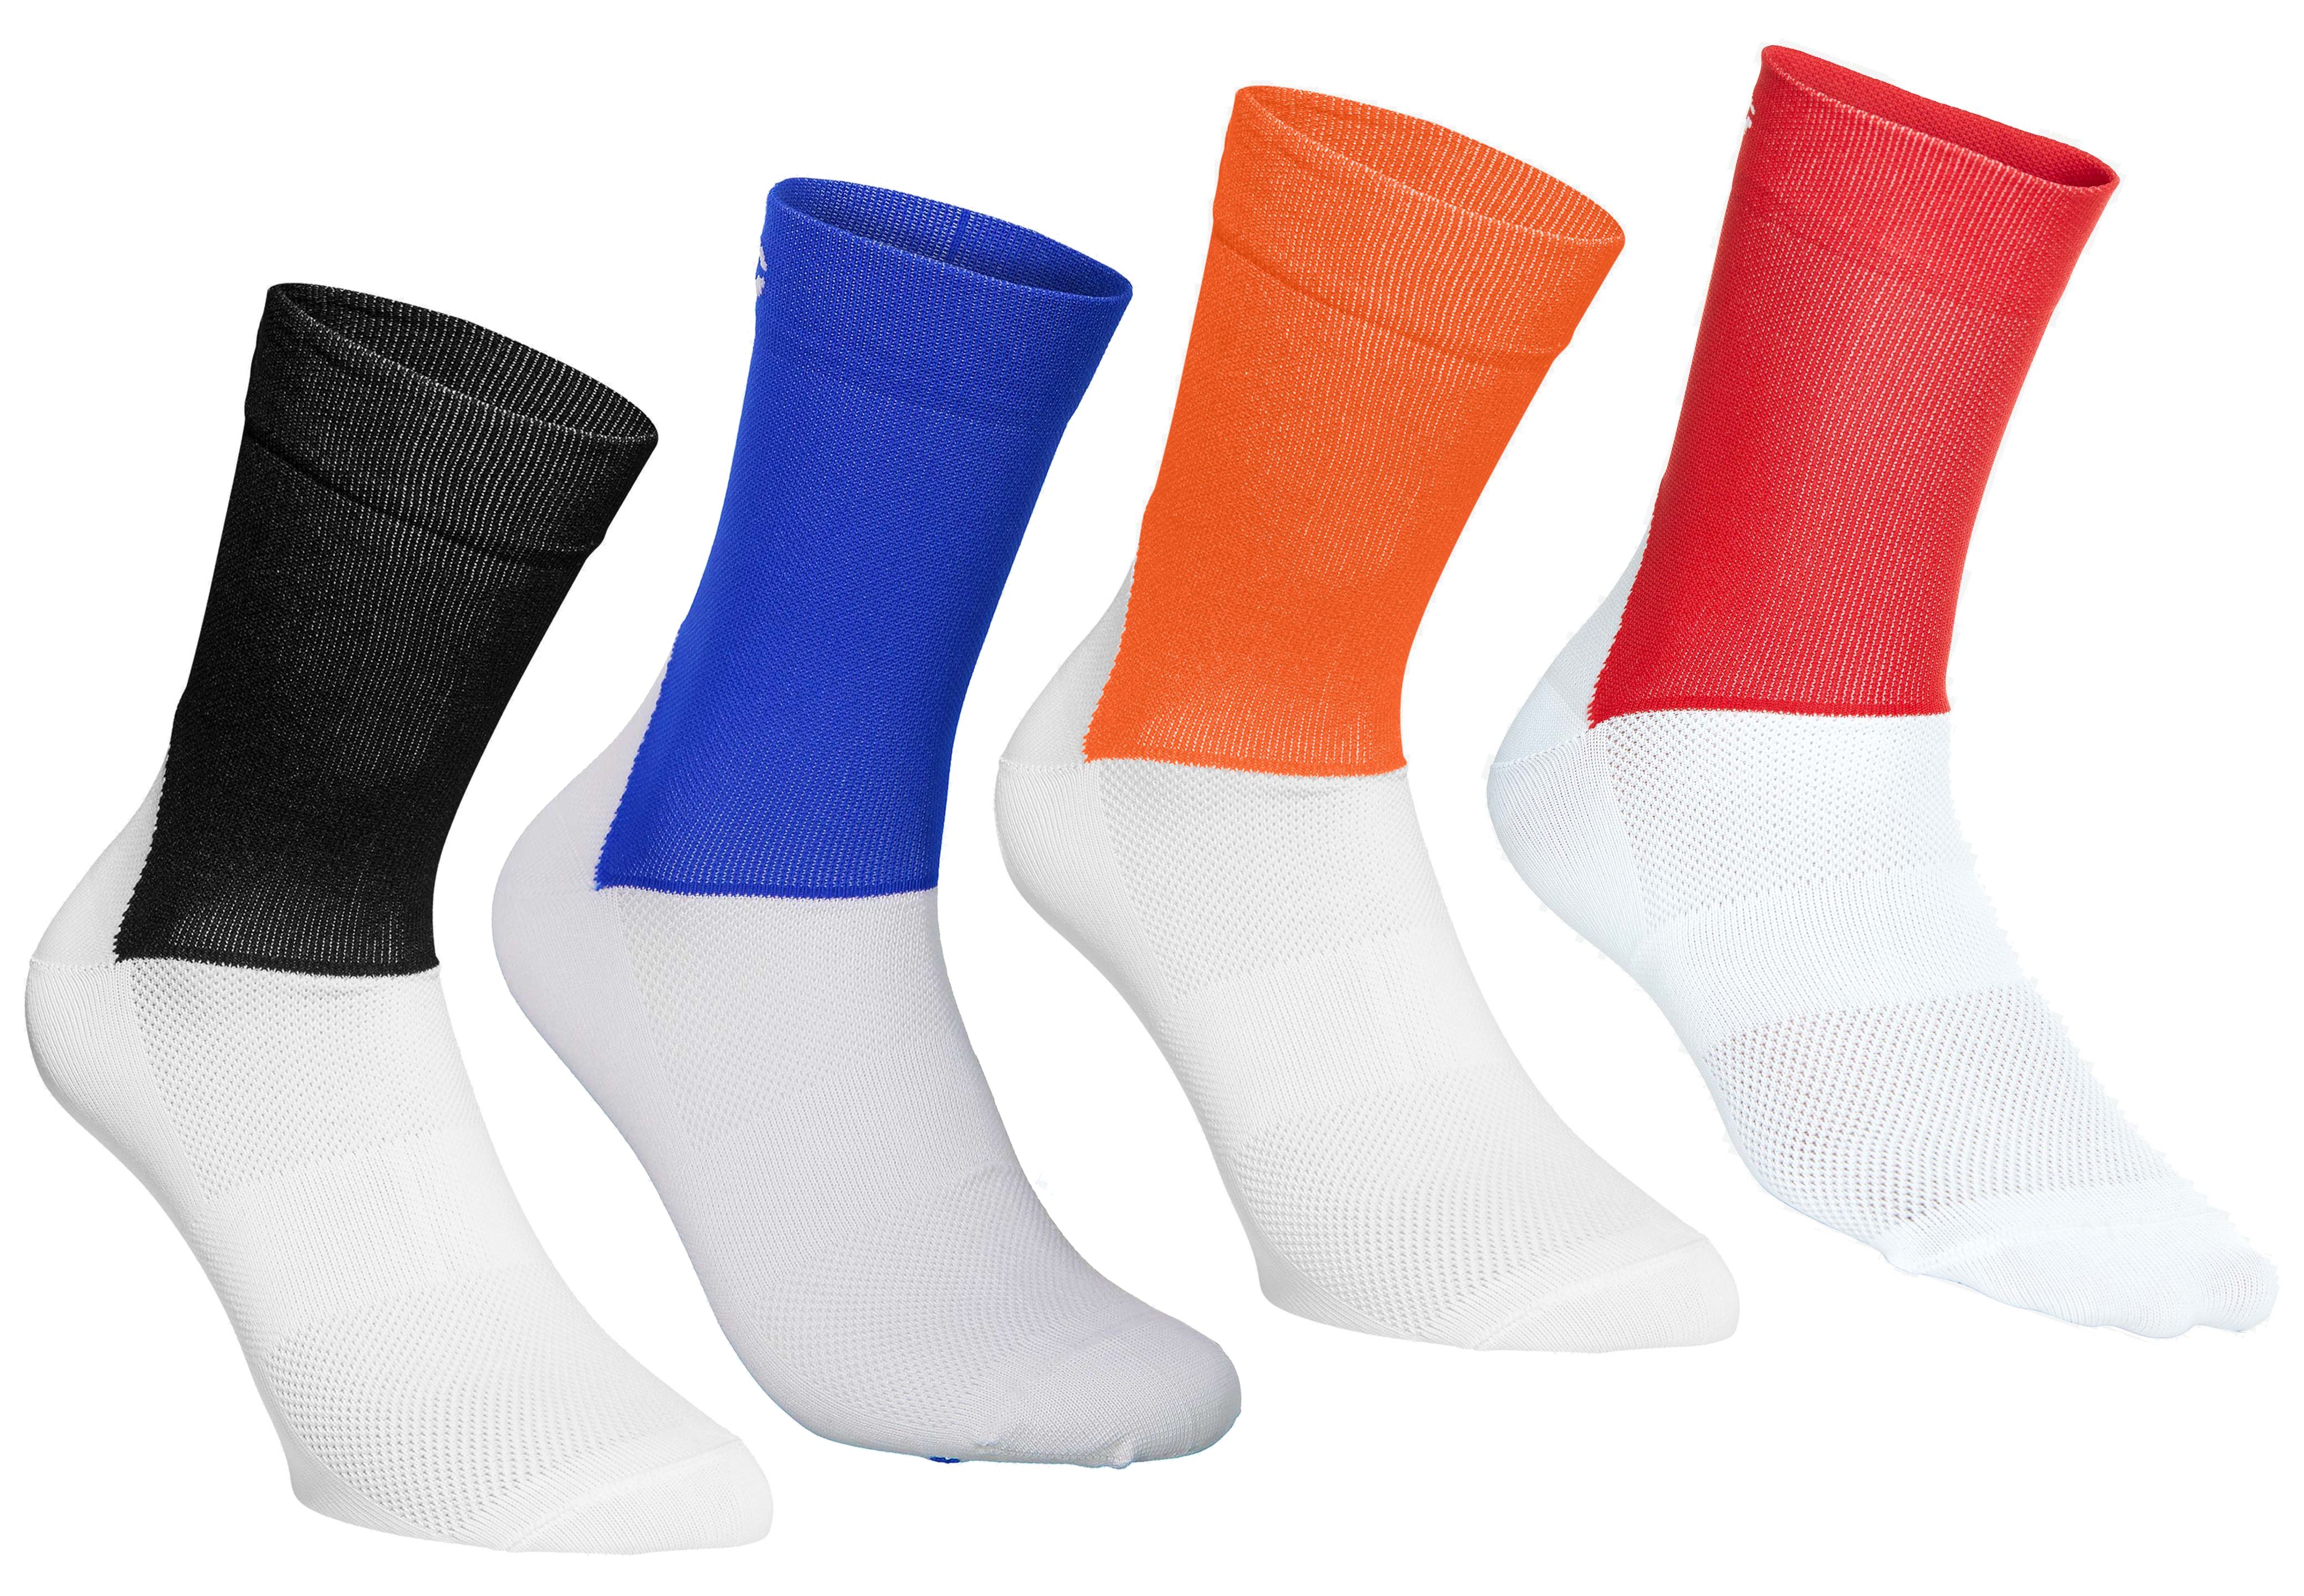 Poc Essential Road Socks Large Size Only 2020 - £9.99 | Socks | Cyclestore